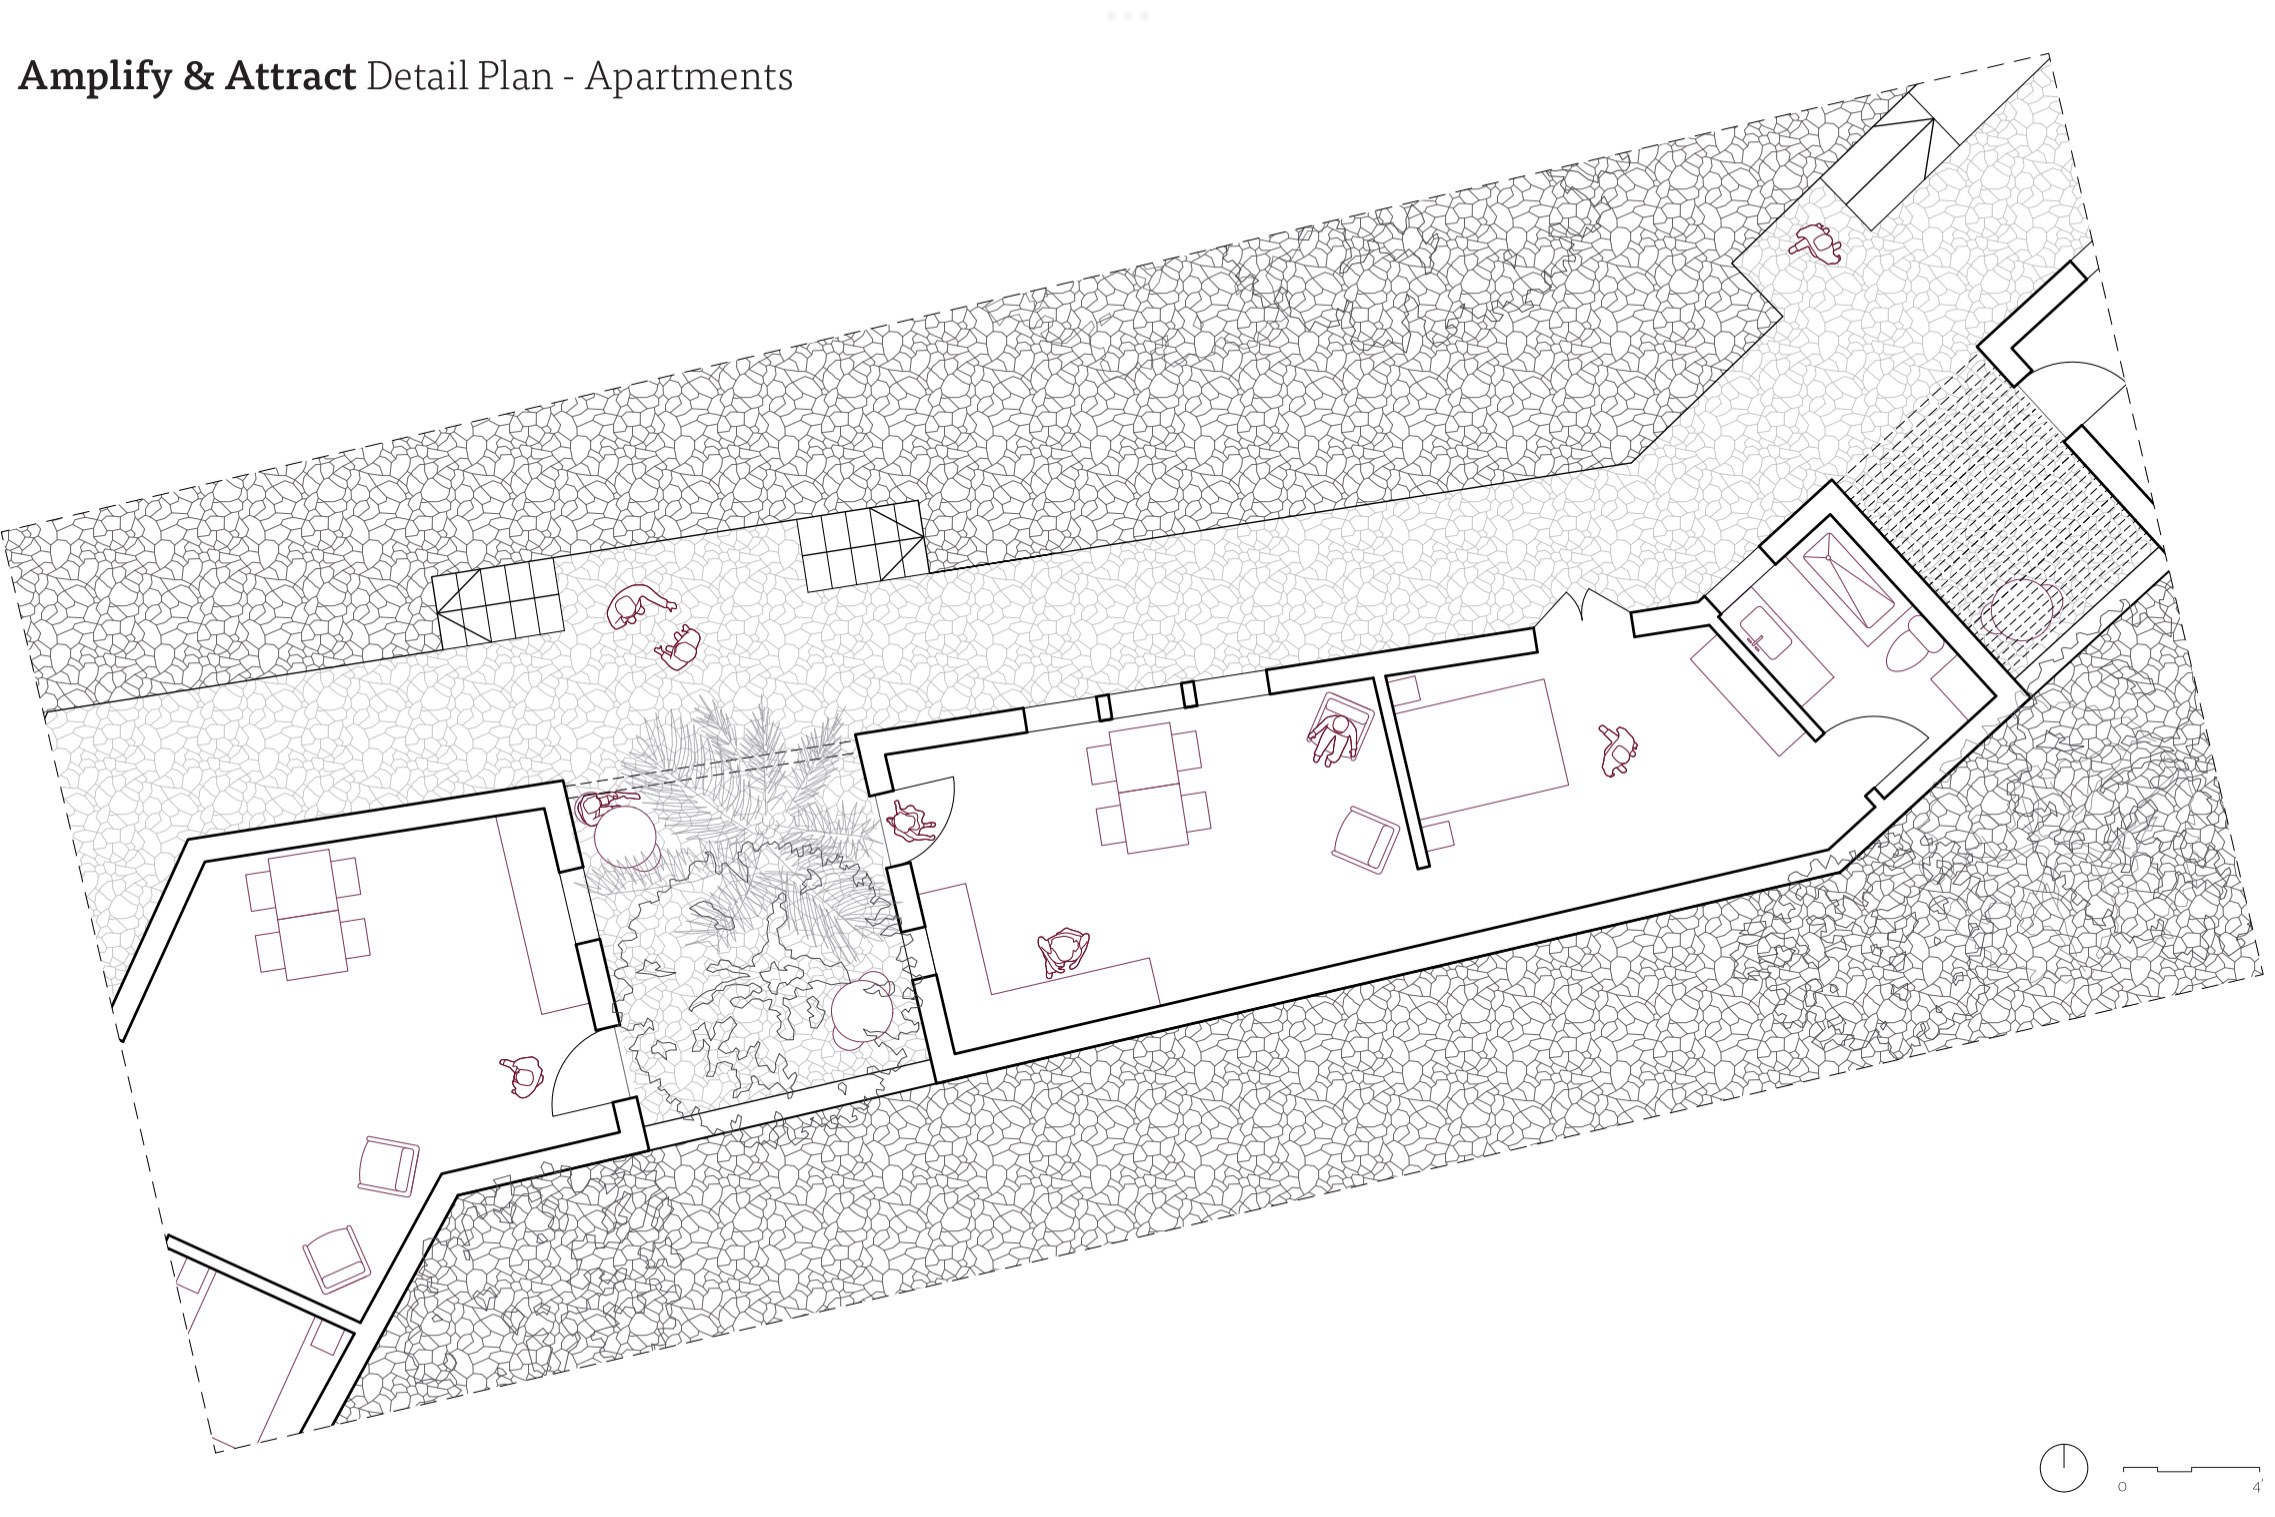 Giuliana Vaccarino Gearty’s Thesis: apartments detail plan